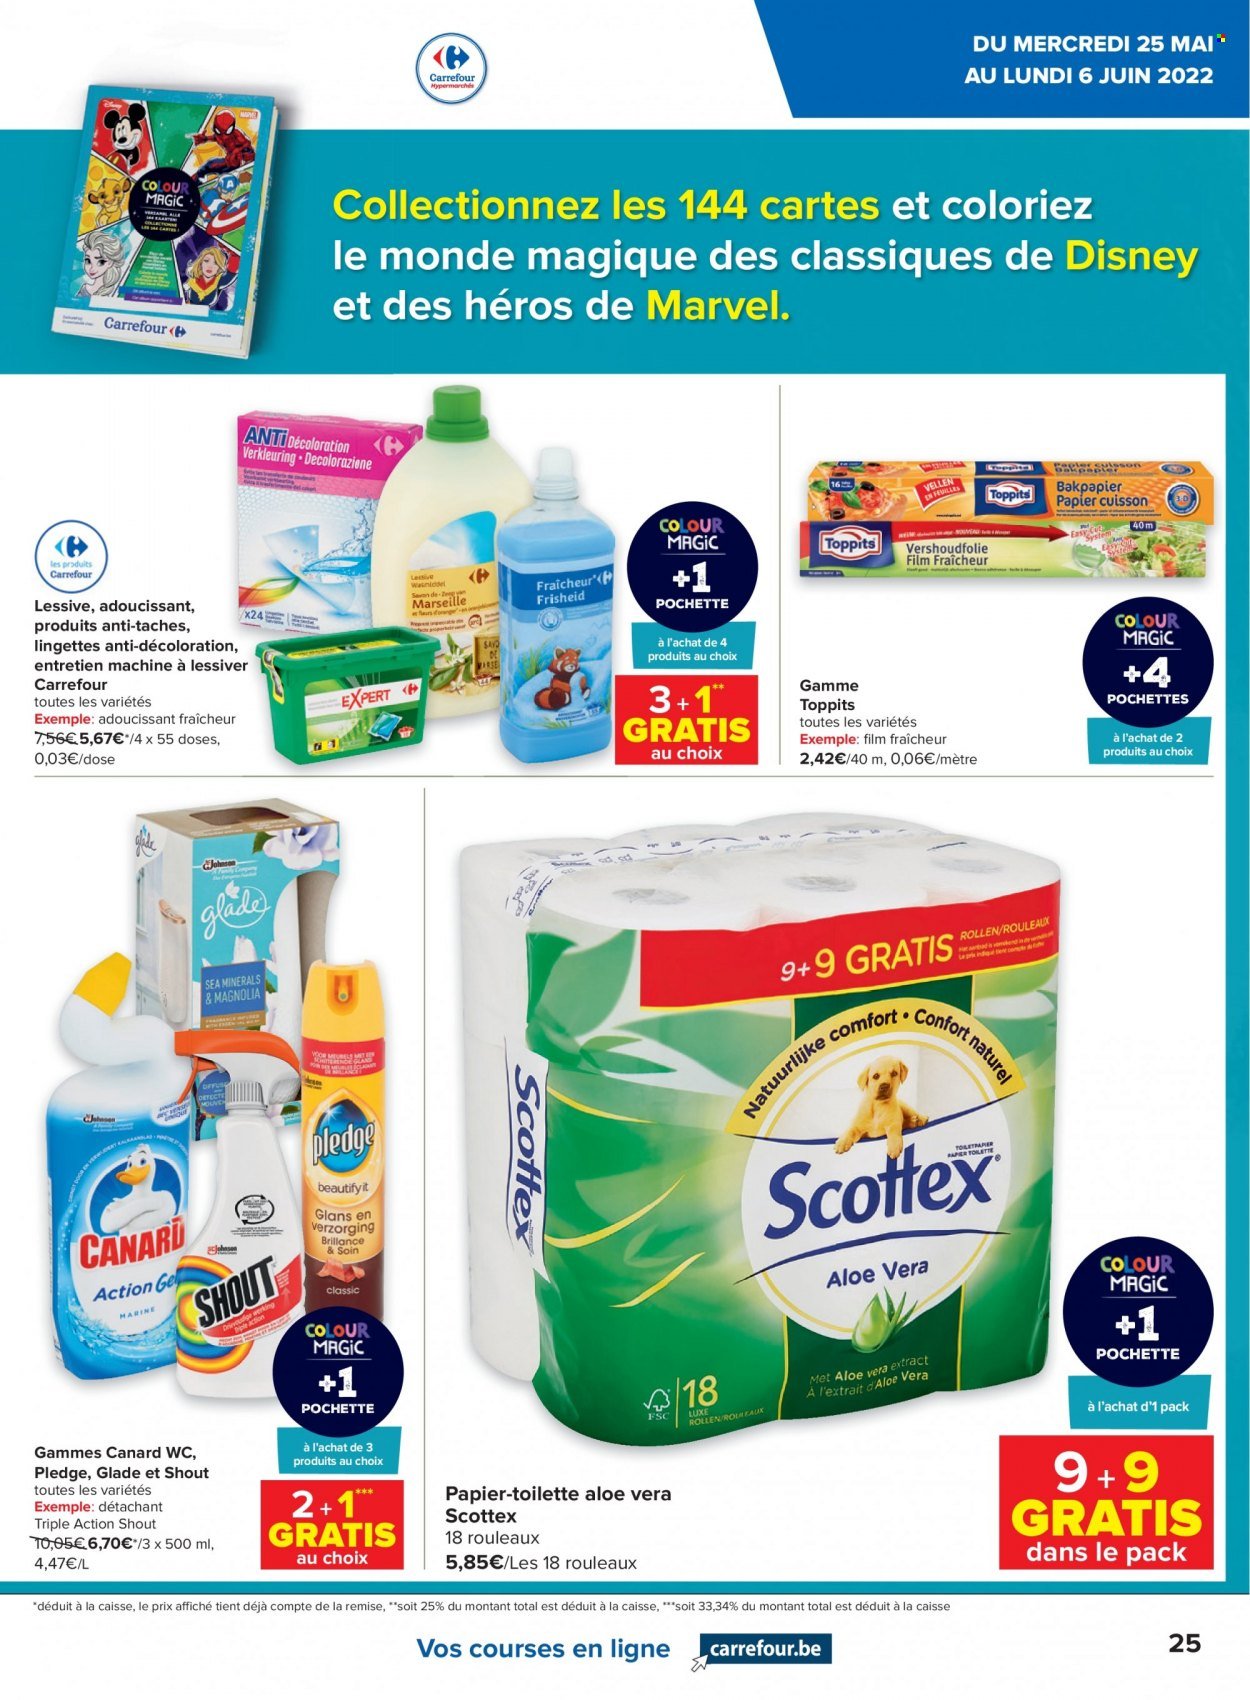 Catalogue Carrefour hypermarkt - 25.5.2022 - 31.5.2022. Page 25.